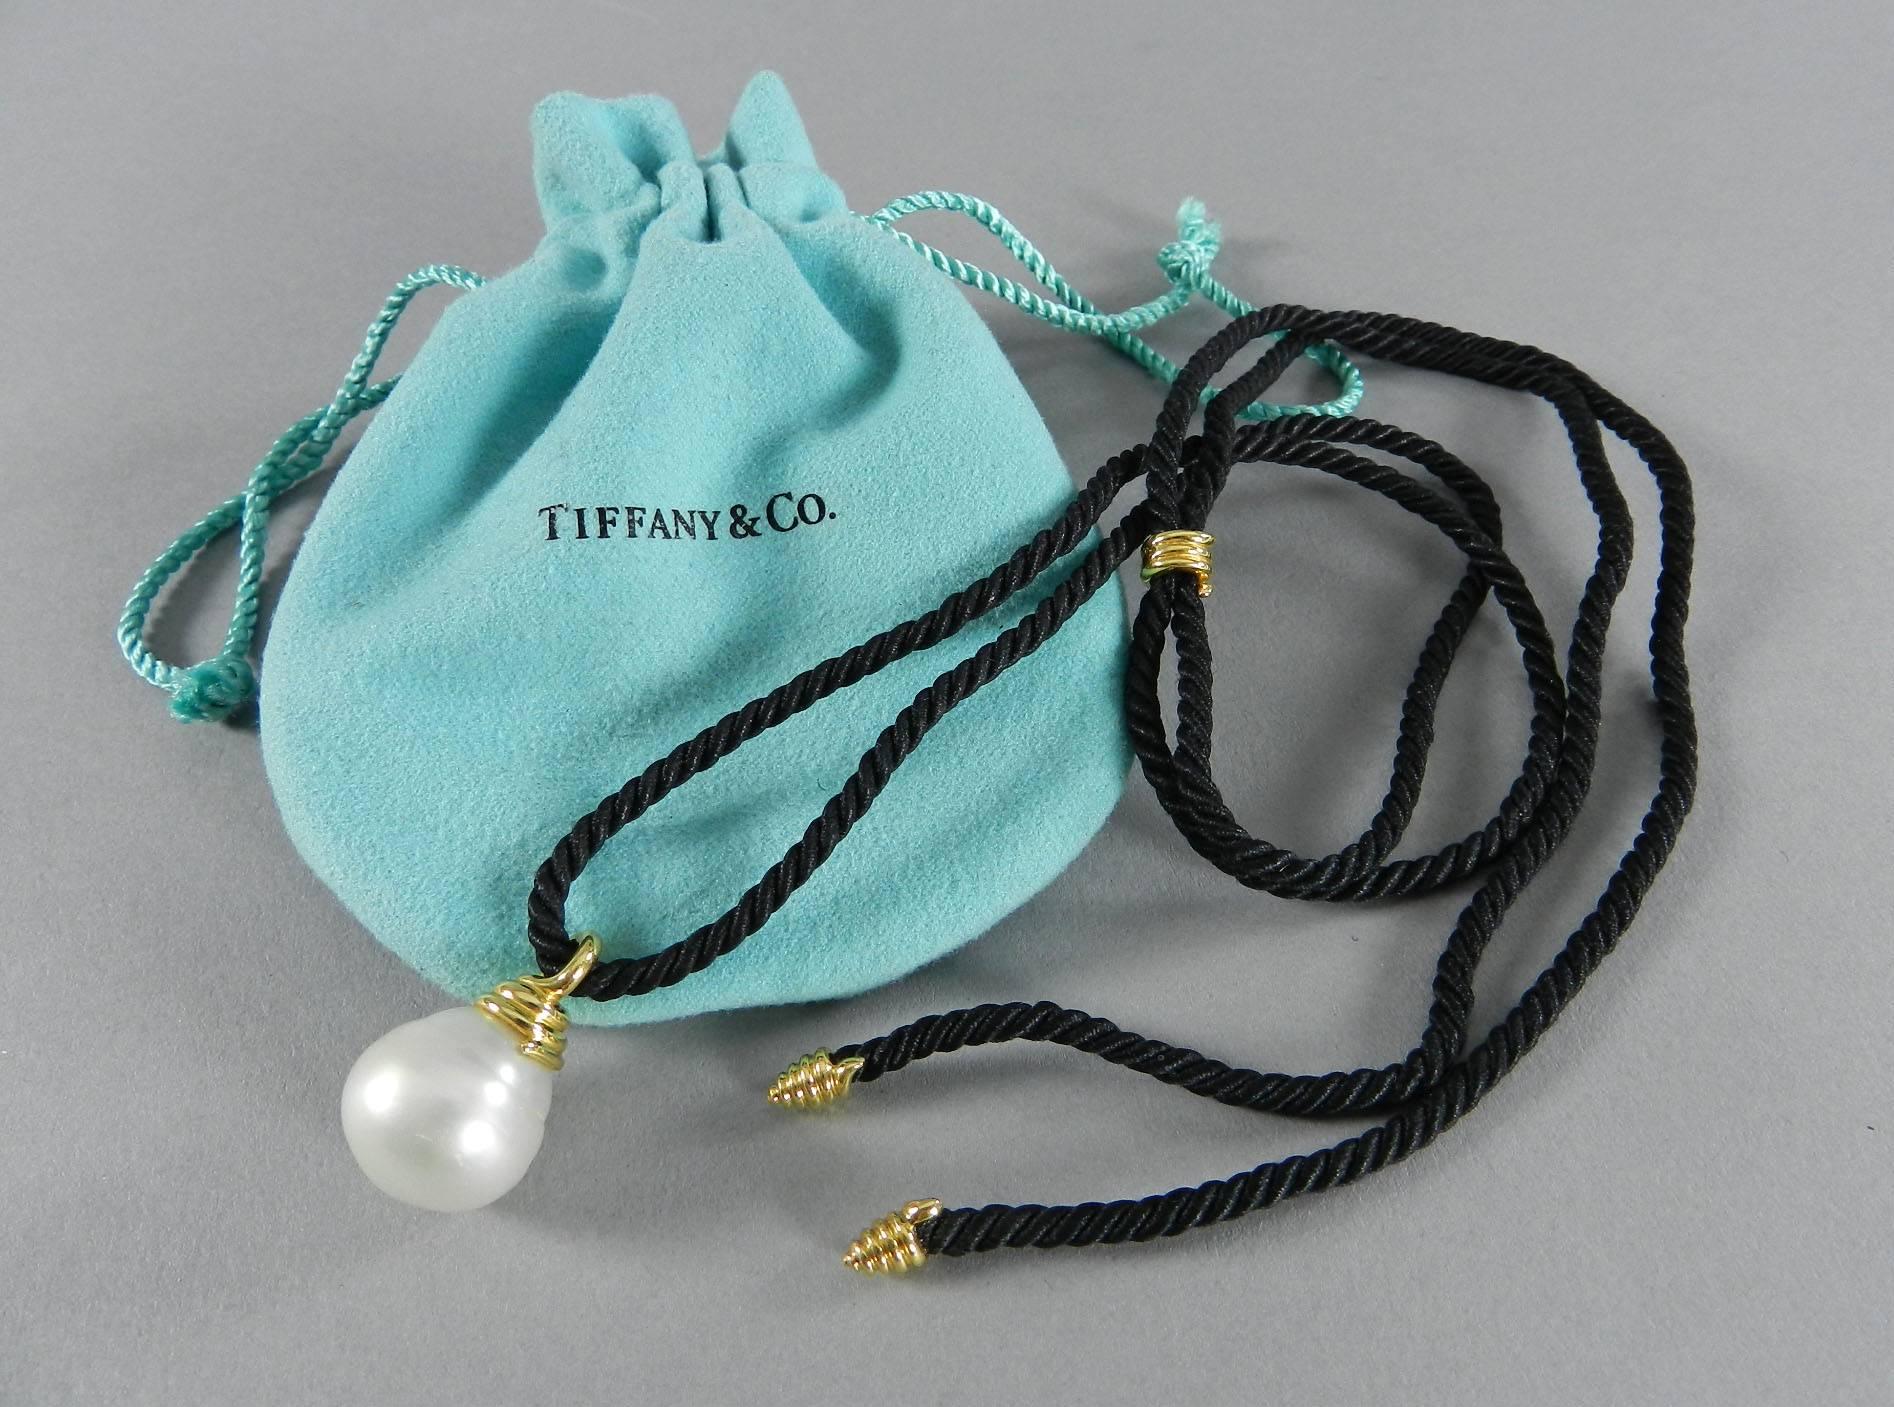 Tiffany & Co. south sea pearl necklace on cord. 18k yellow gold. Adjustable length with maximum 38